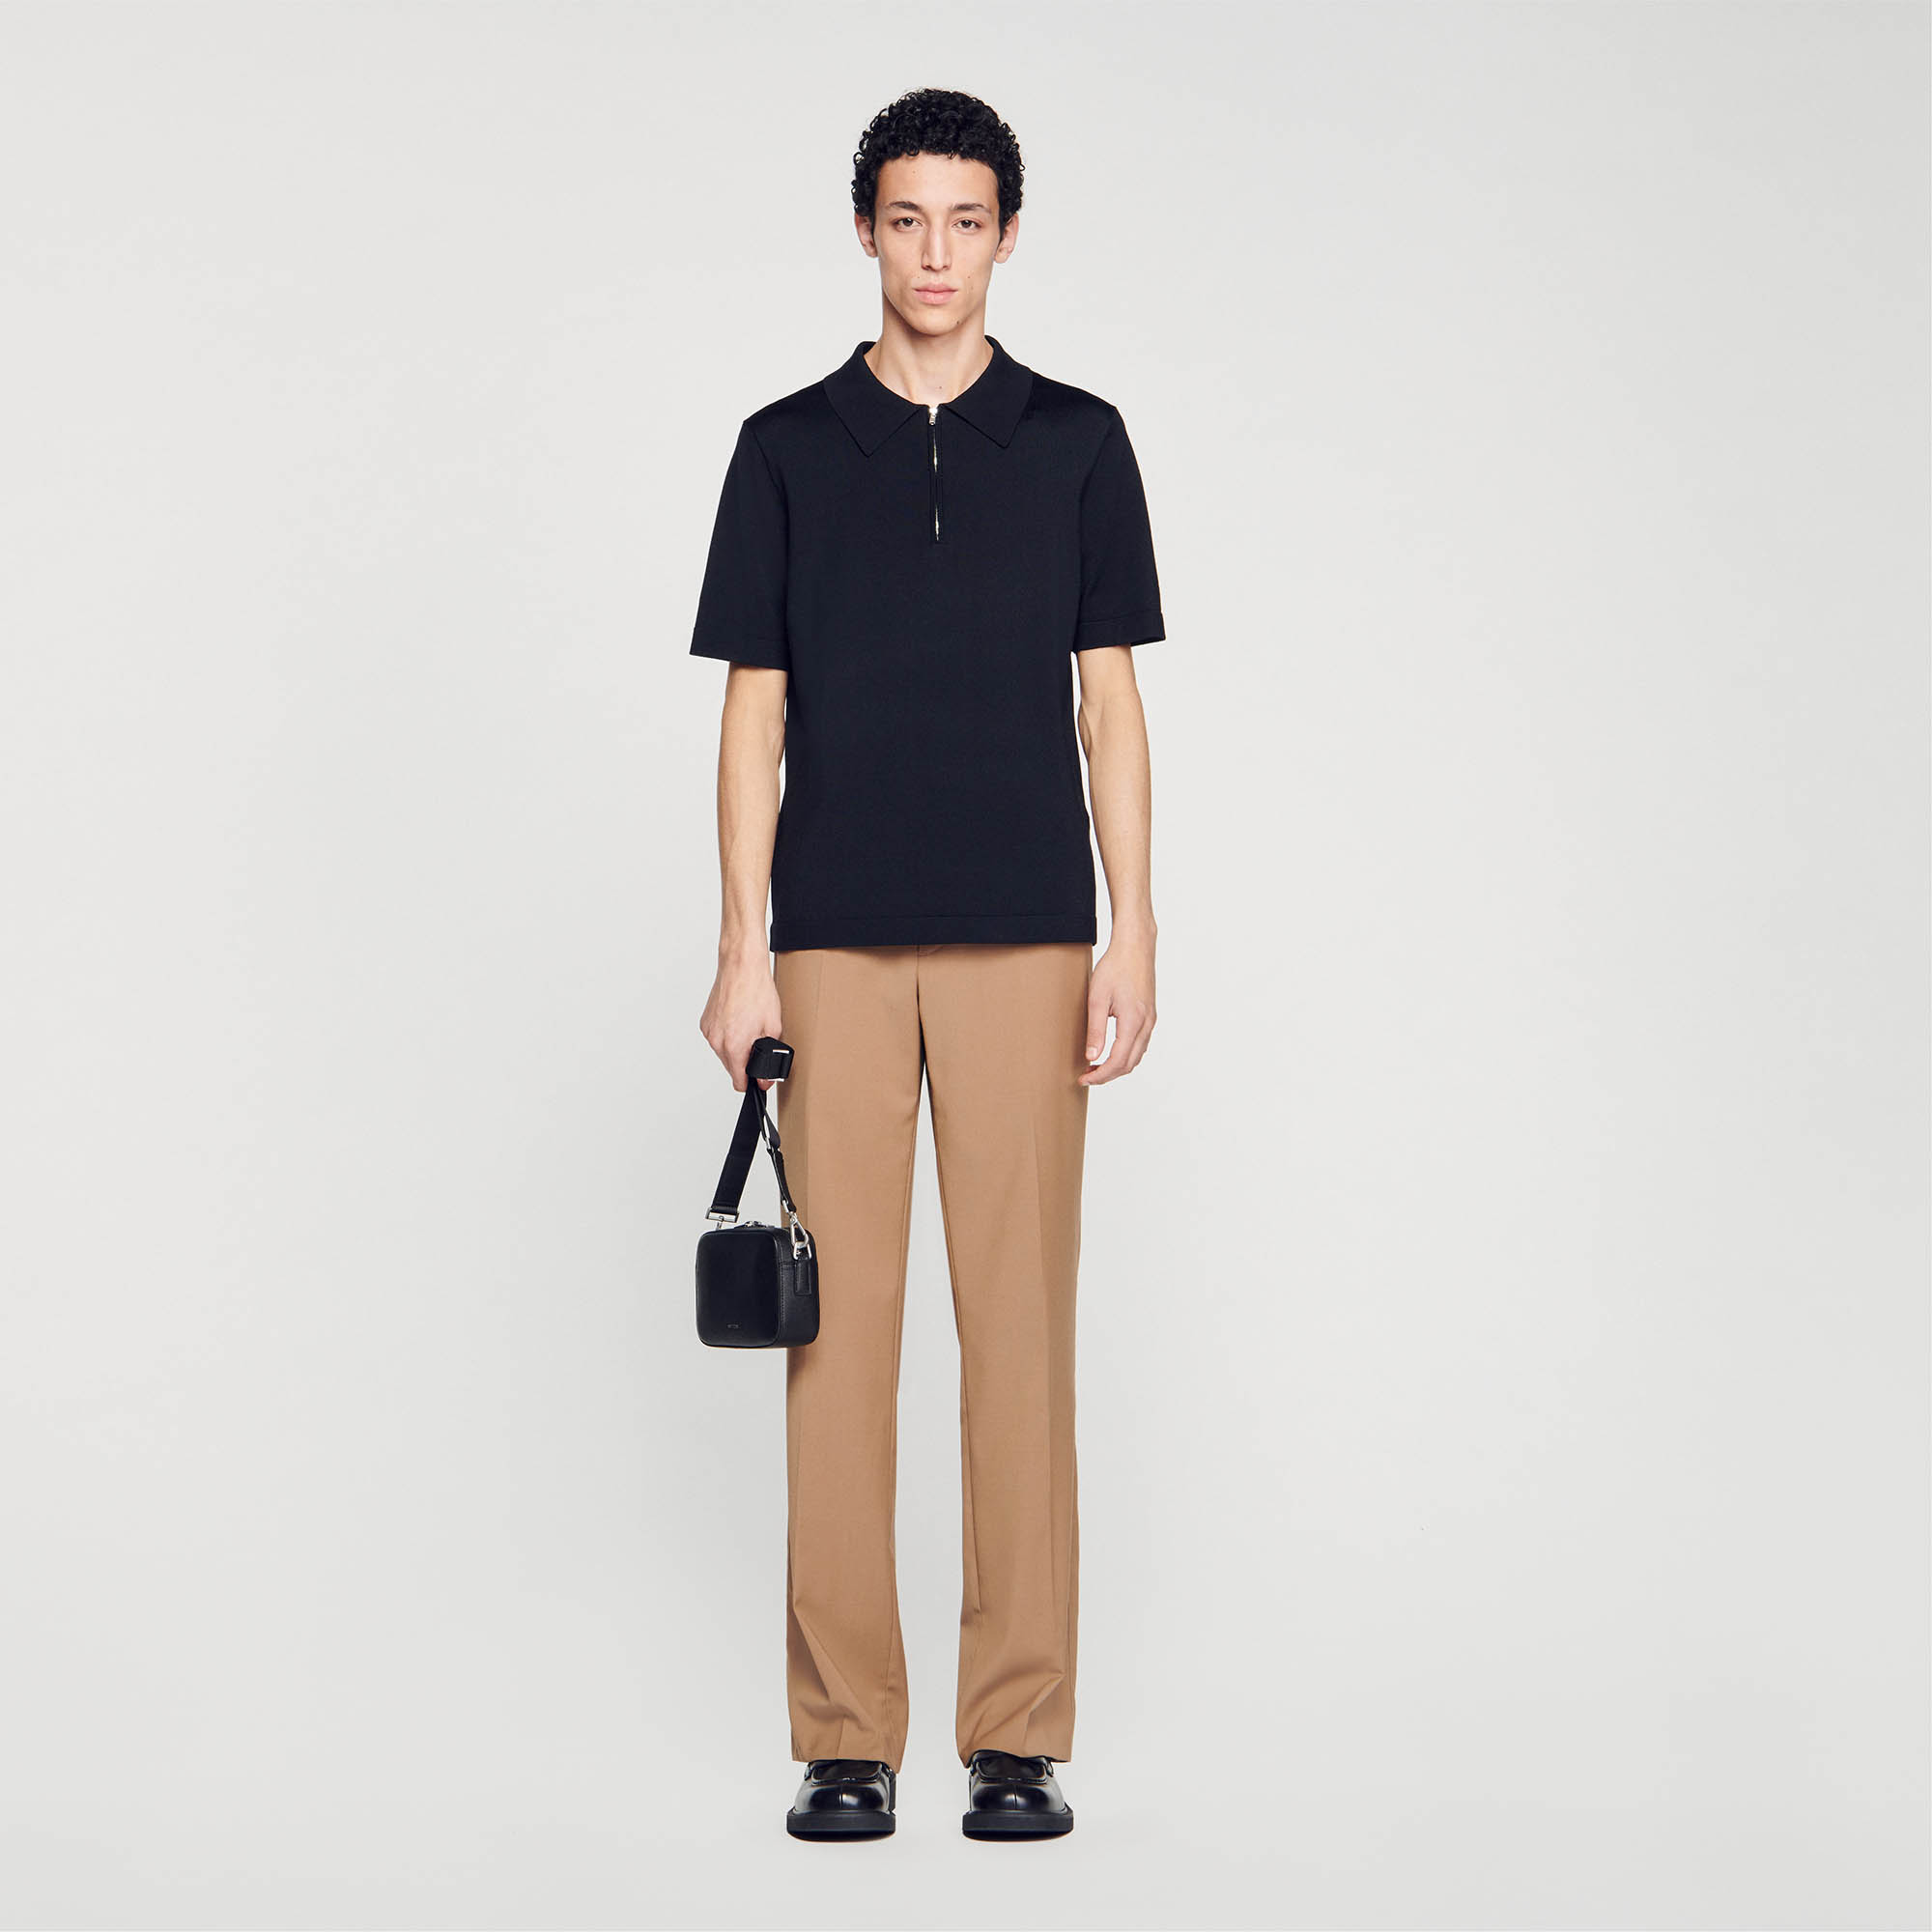 Sandro acetate Knitted polo shirt with zip collar